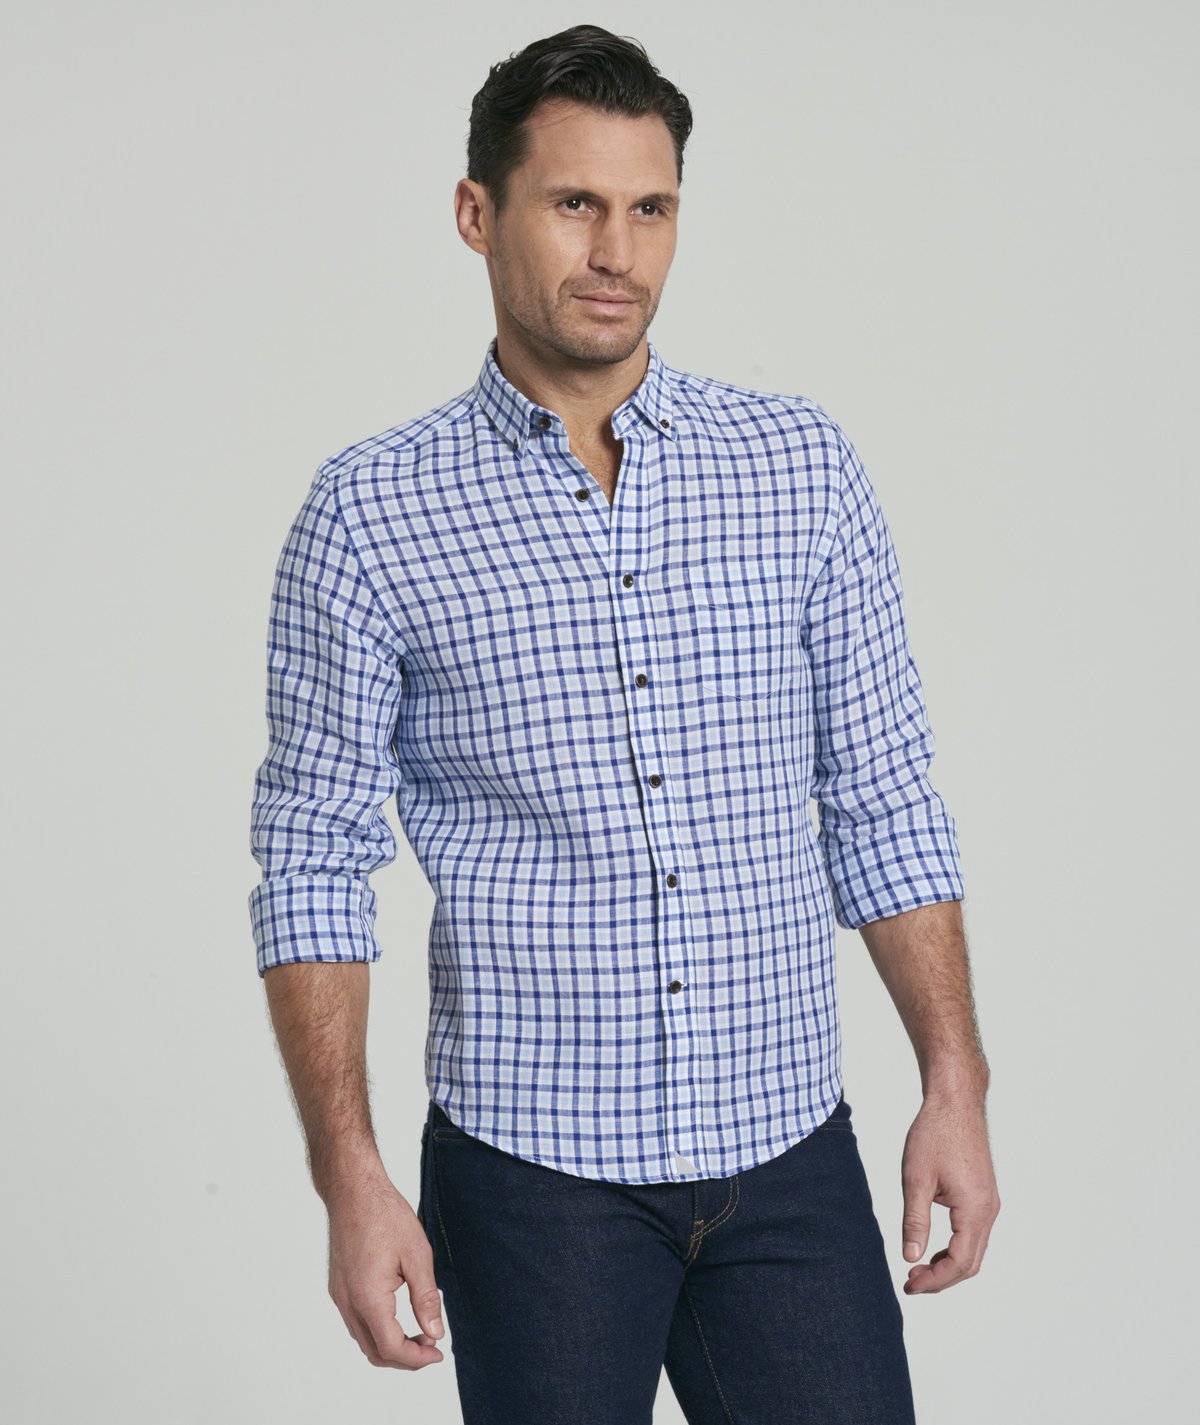 Concealed Carry Shirts for the Tactical Gentleman by UNTUCKit? • Spotter Up